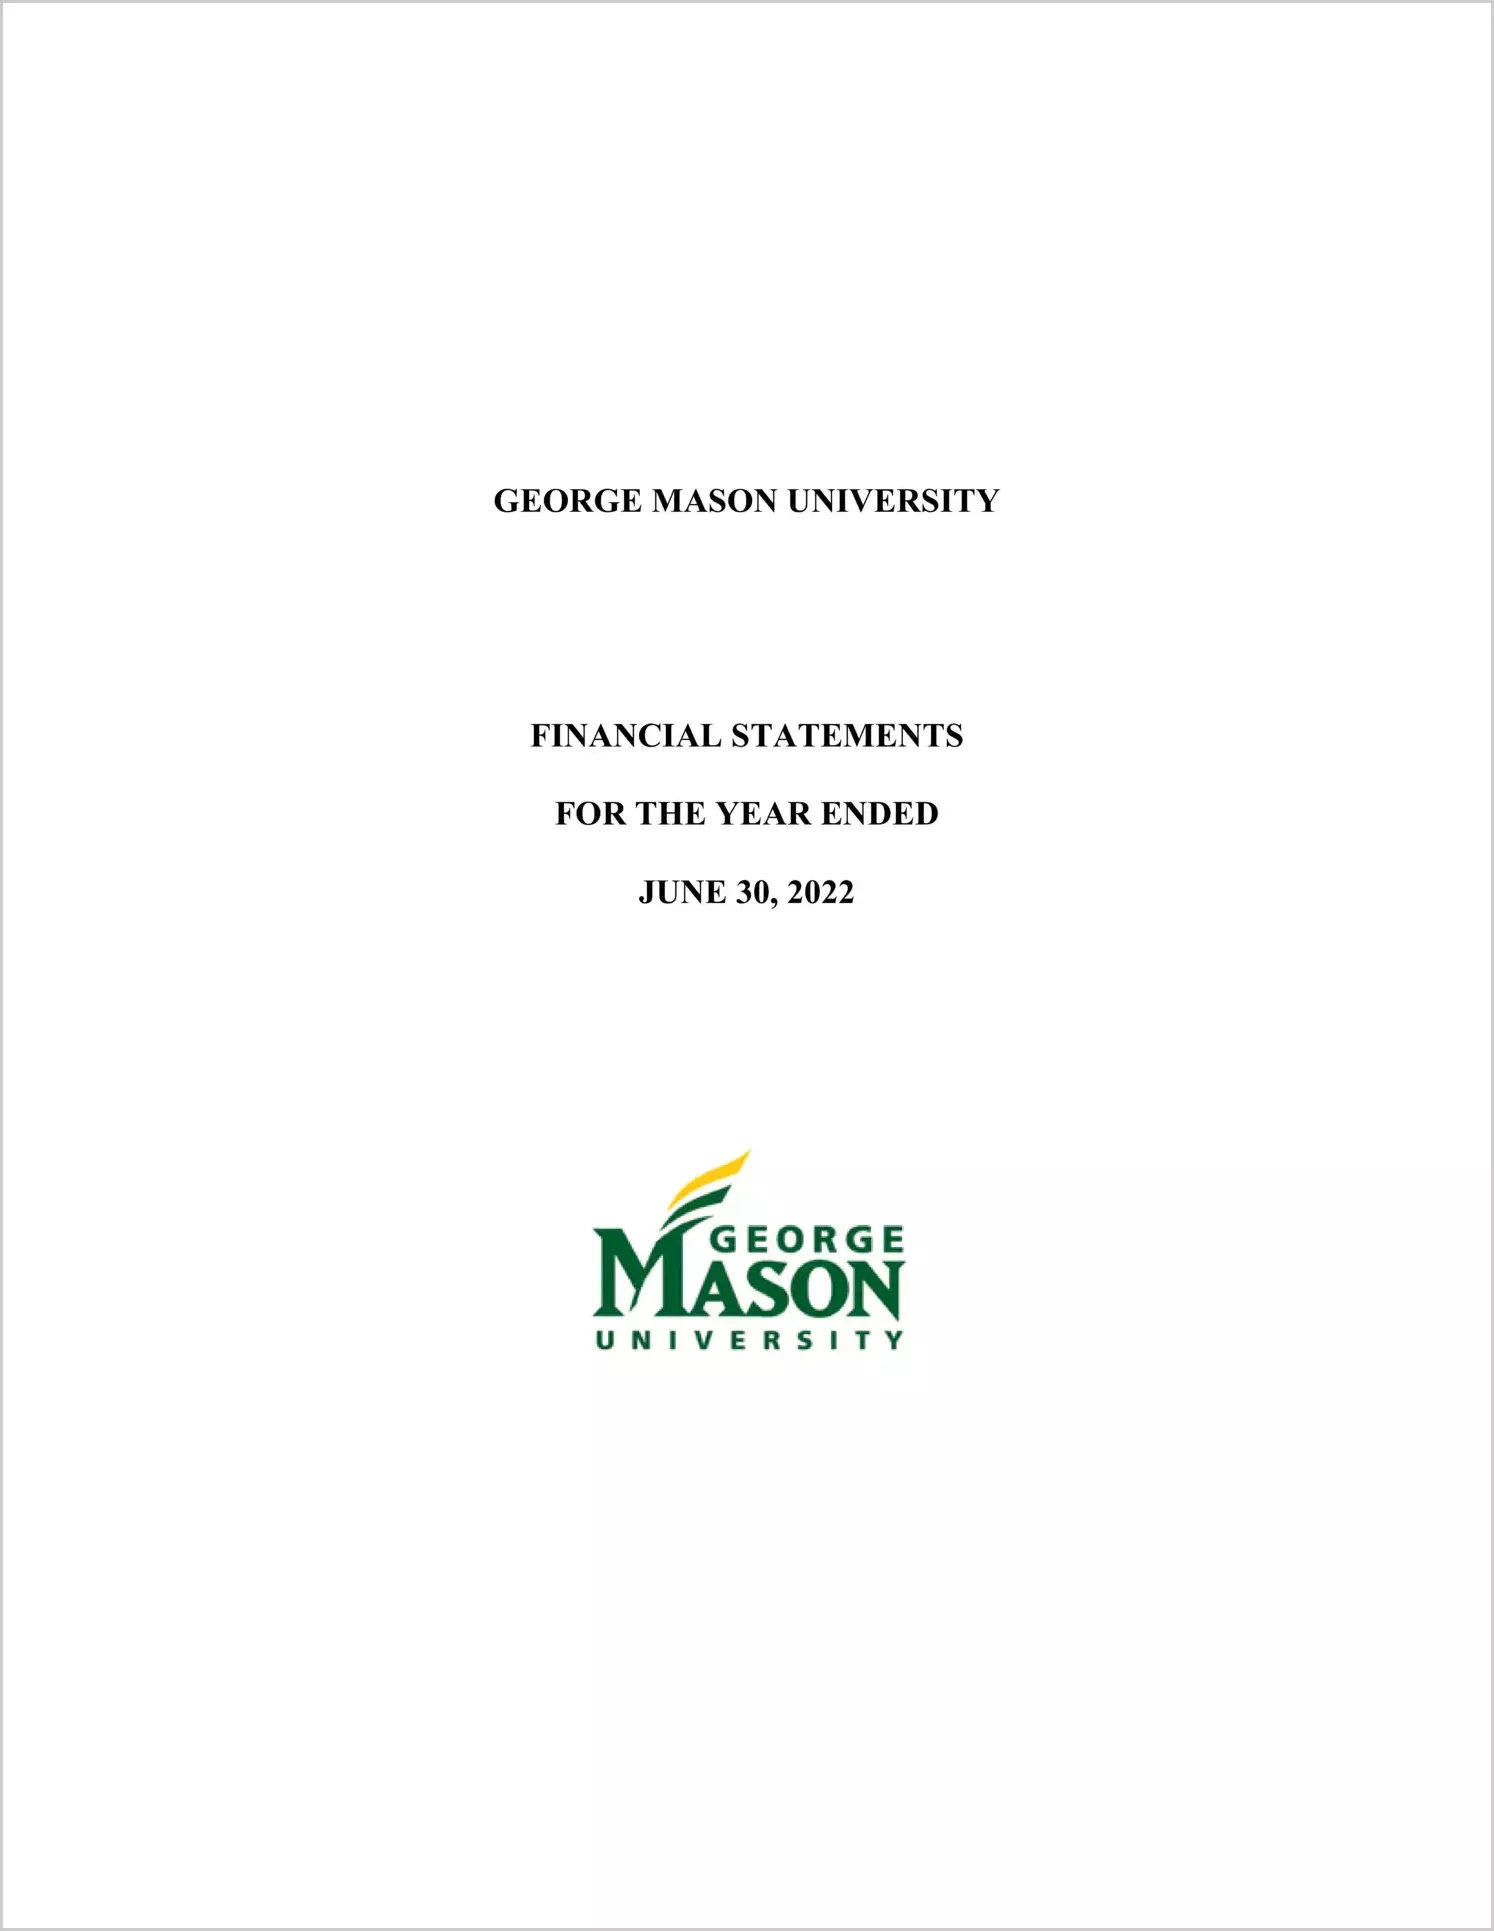 George Mason University Financial Statements for the year ended June 30, 2022